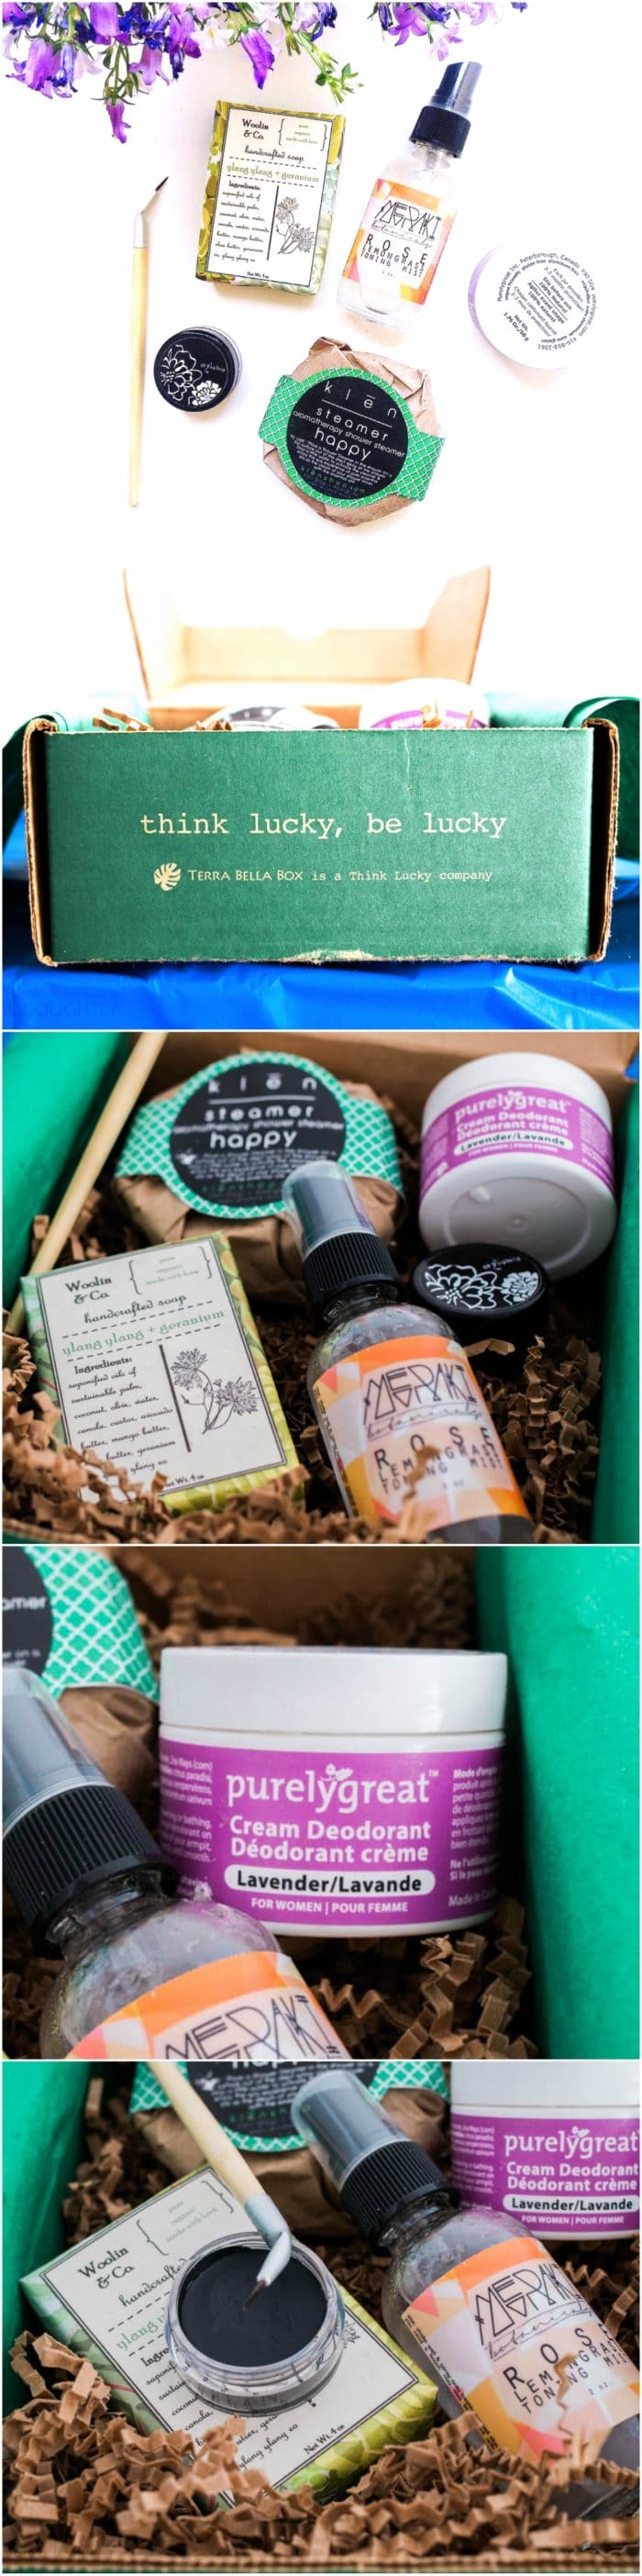 Terra Bella Vegan and Cruelty Free Beauty and Makeup Subscription Box